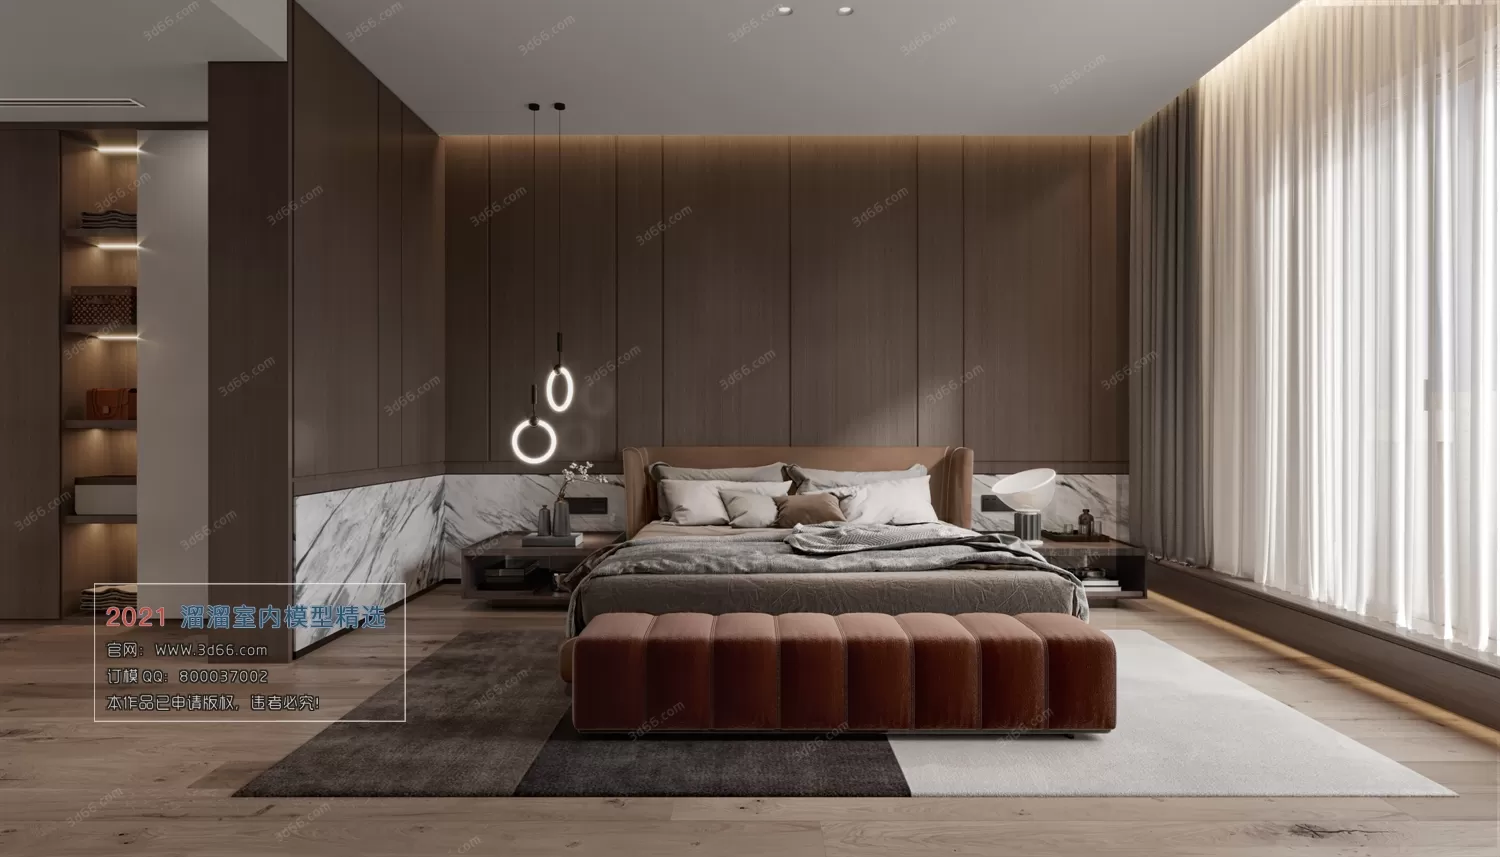 BEDROOM – A023-Modern style-Vray model